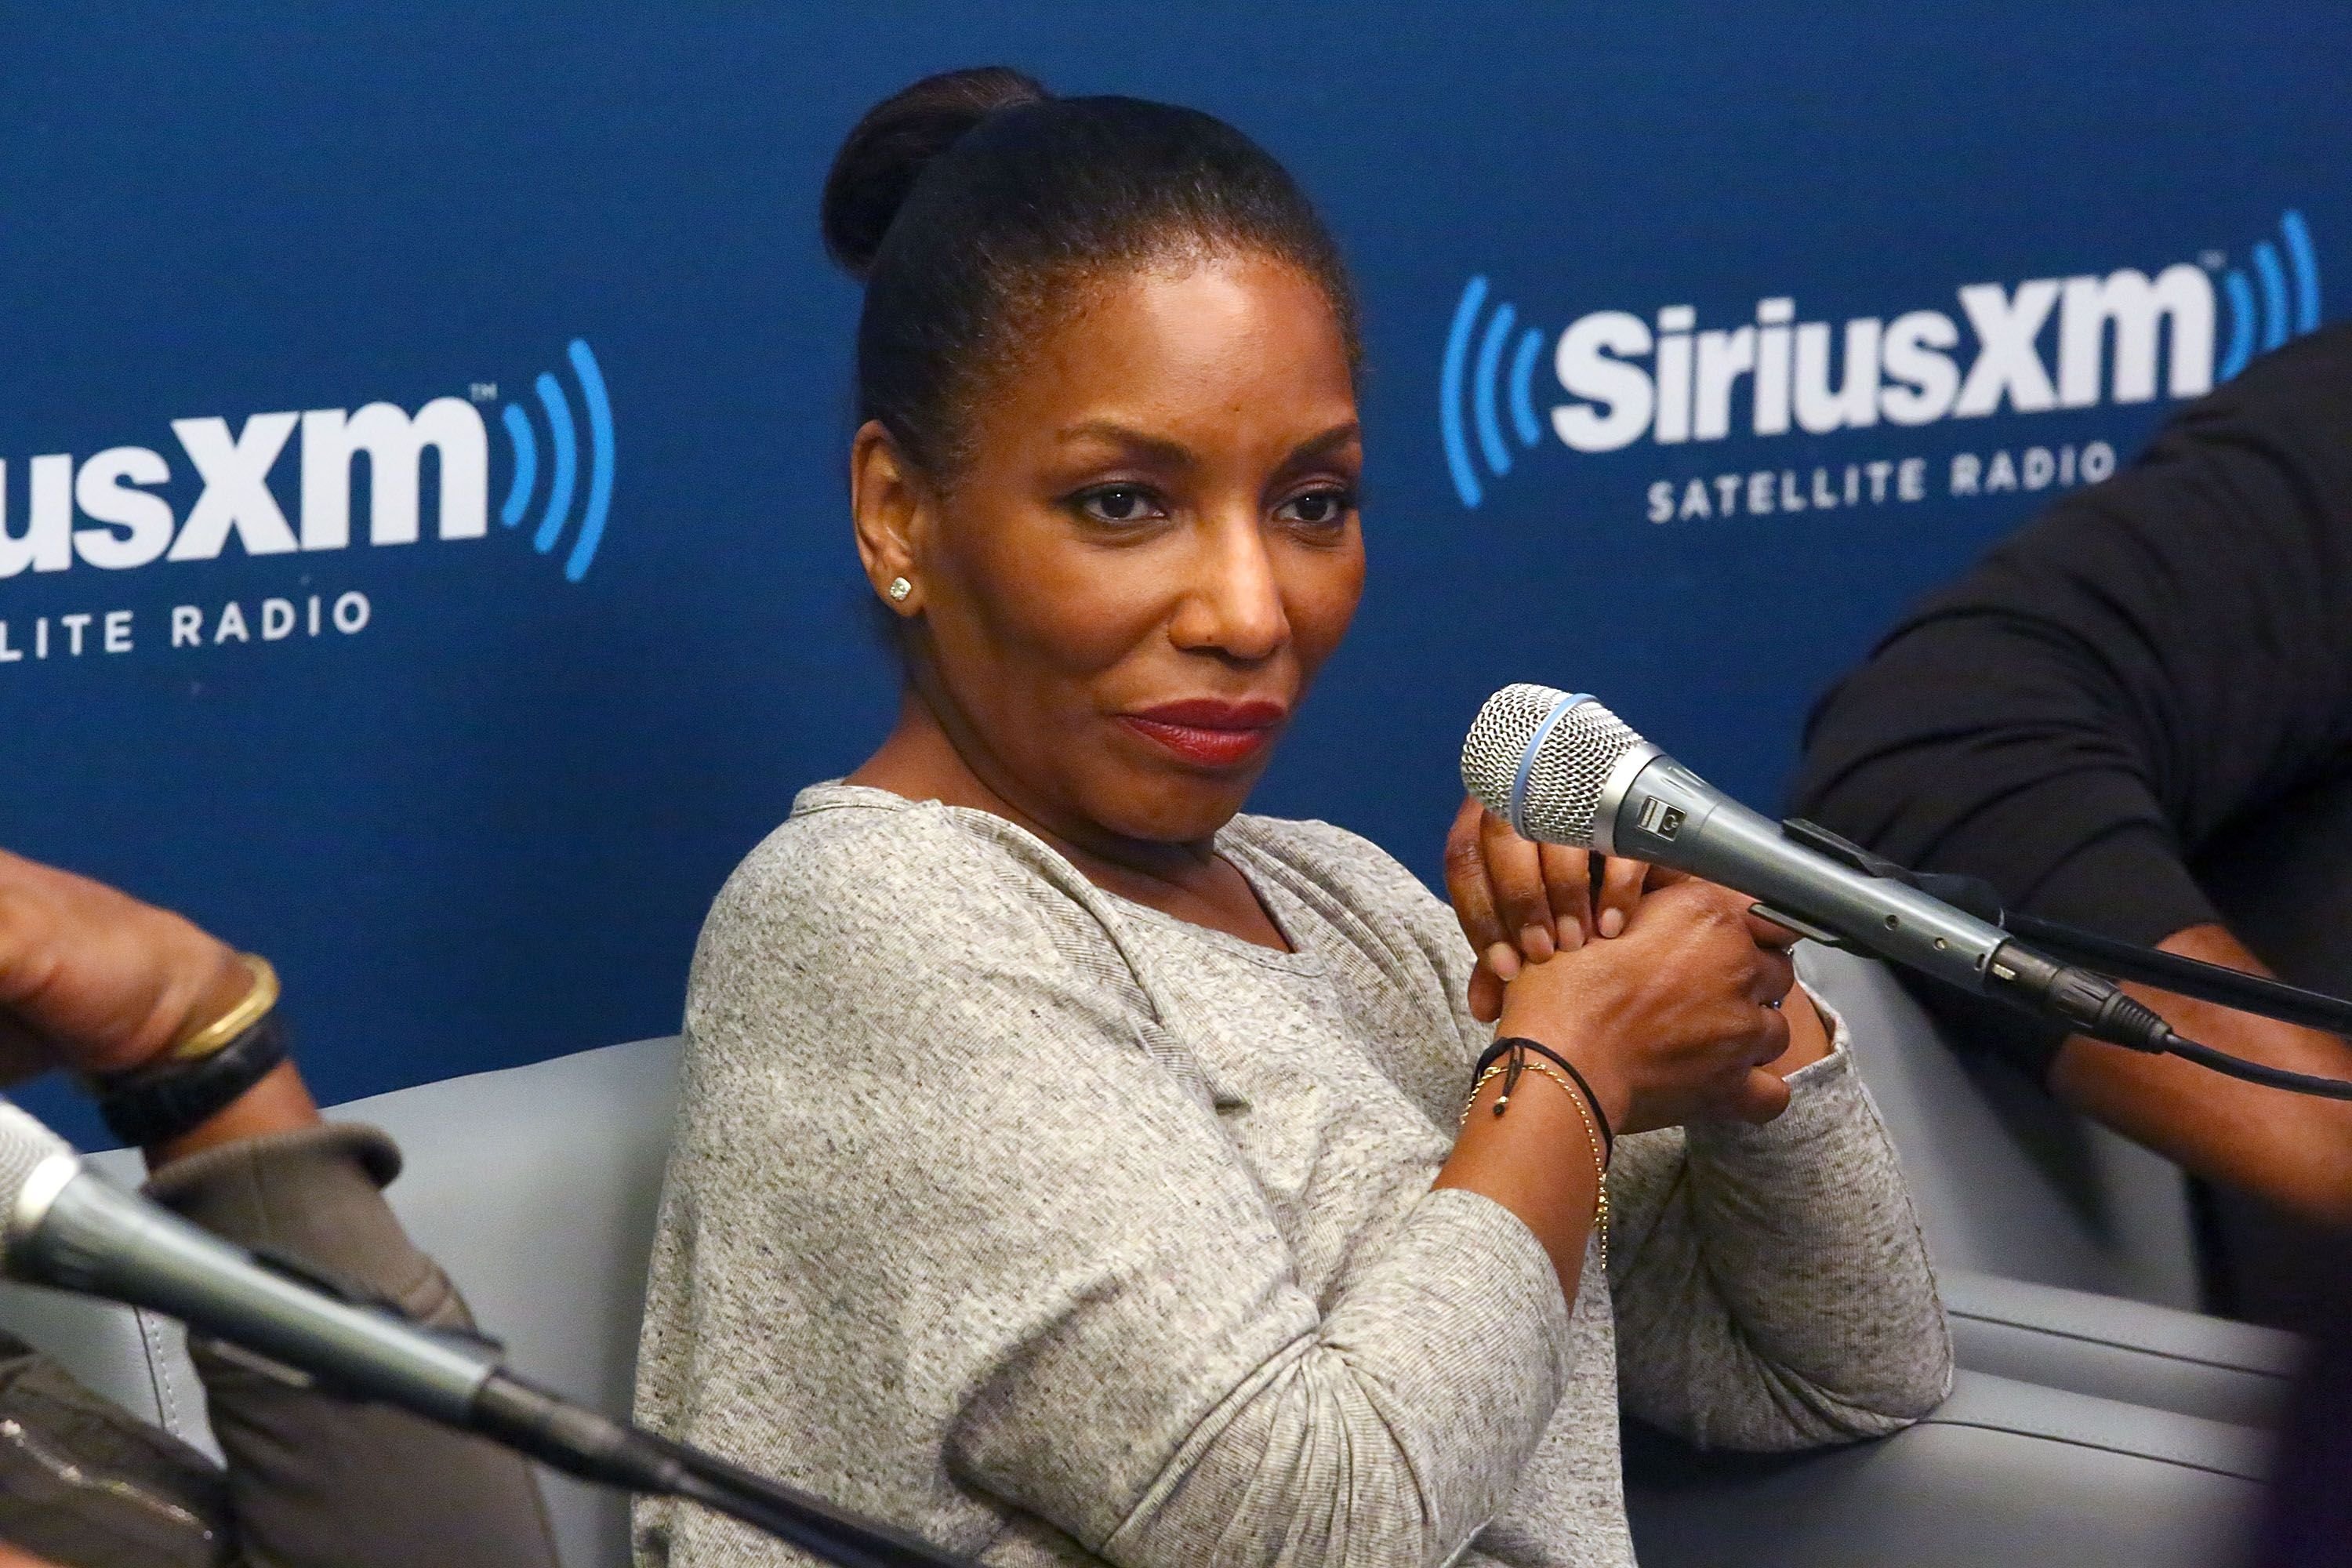 Actress Stephanie Mills attends SiriusXM's Town Hall with the cast of 'The Wiz' hosted by Radio Andy host Bevy Smith at the SiriusXM Studios on October 26, 2015. | Photo: Getty Images